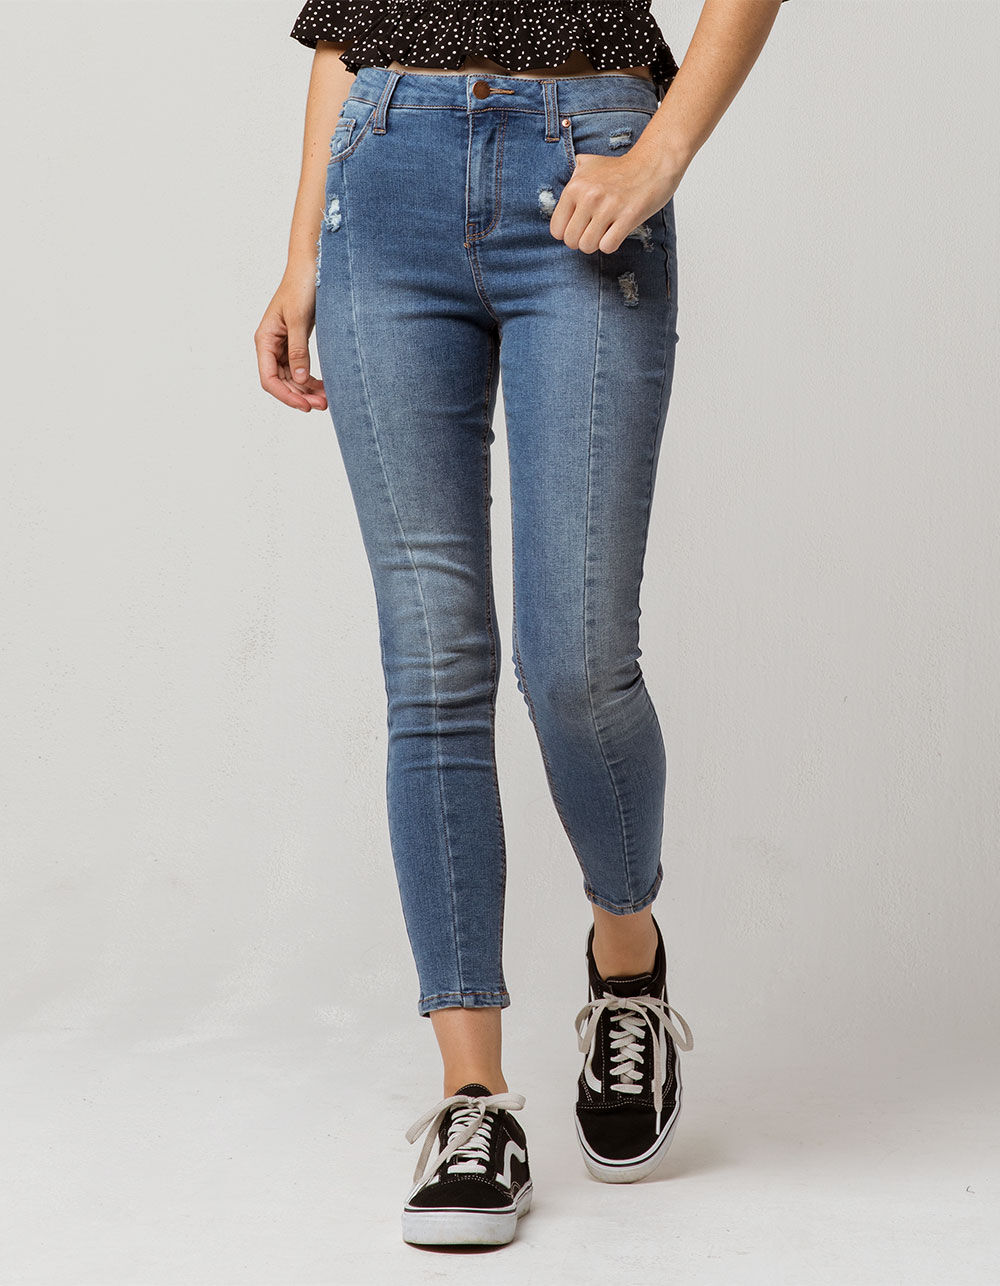 IVY & MAIN Seamed High Waisted Womens Ripped Skinny Jeans - MEDIUM ...